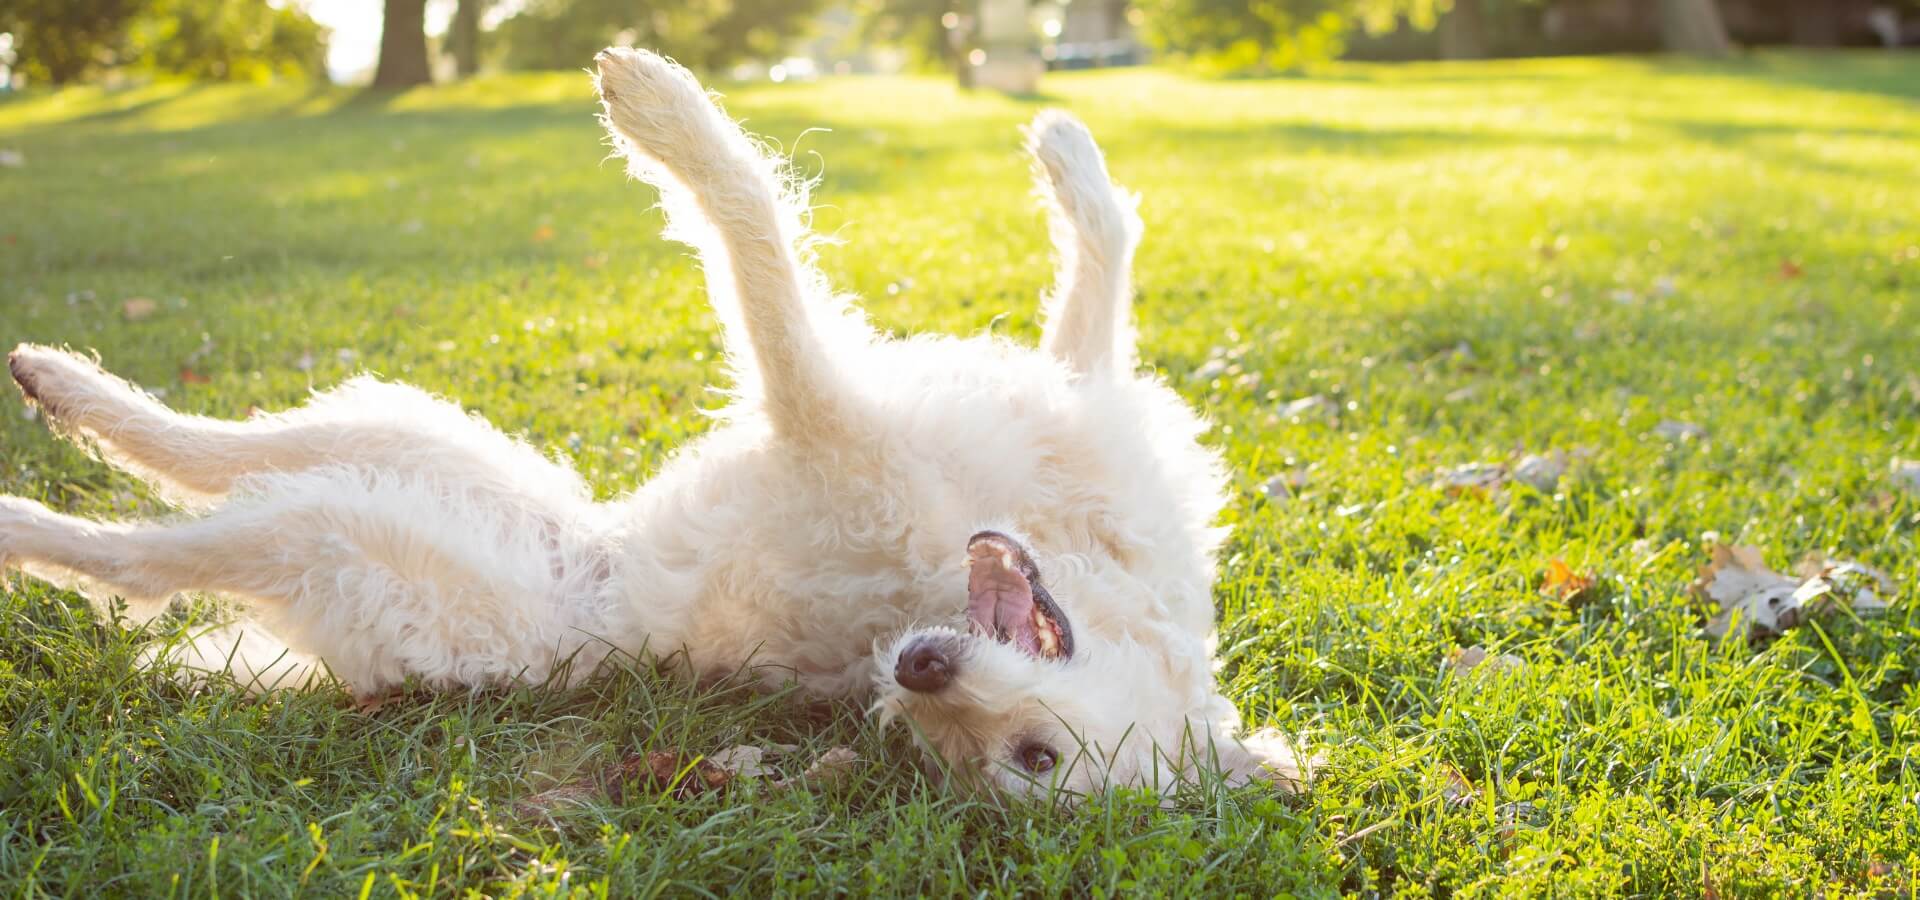 Why Dogs Love Rolling on the Grass